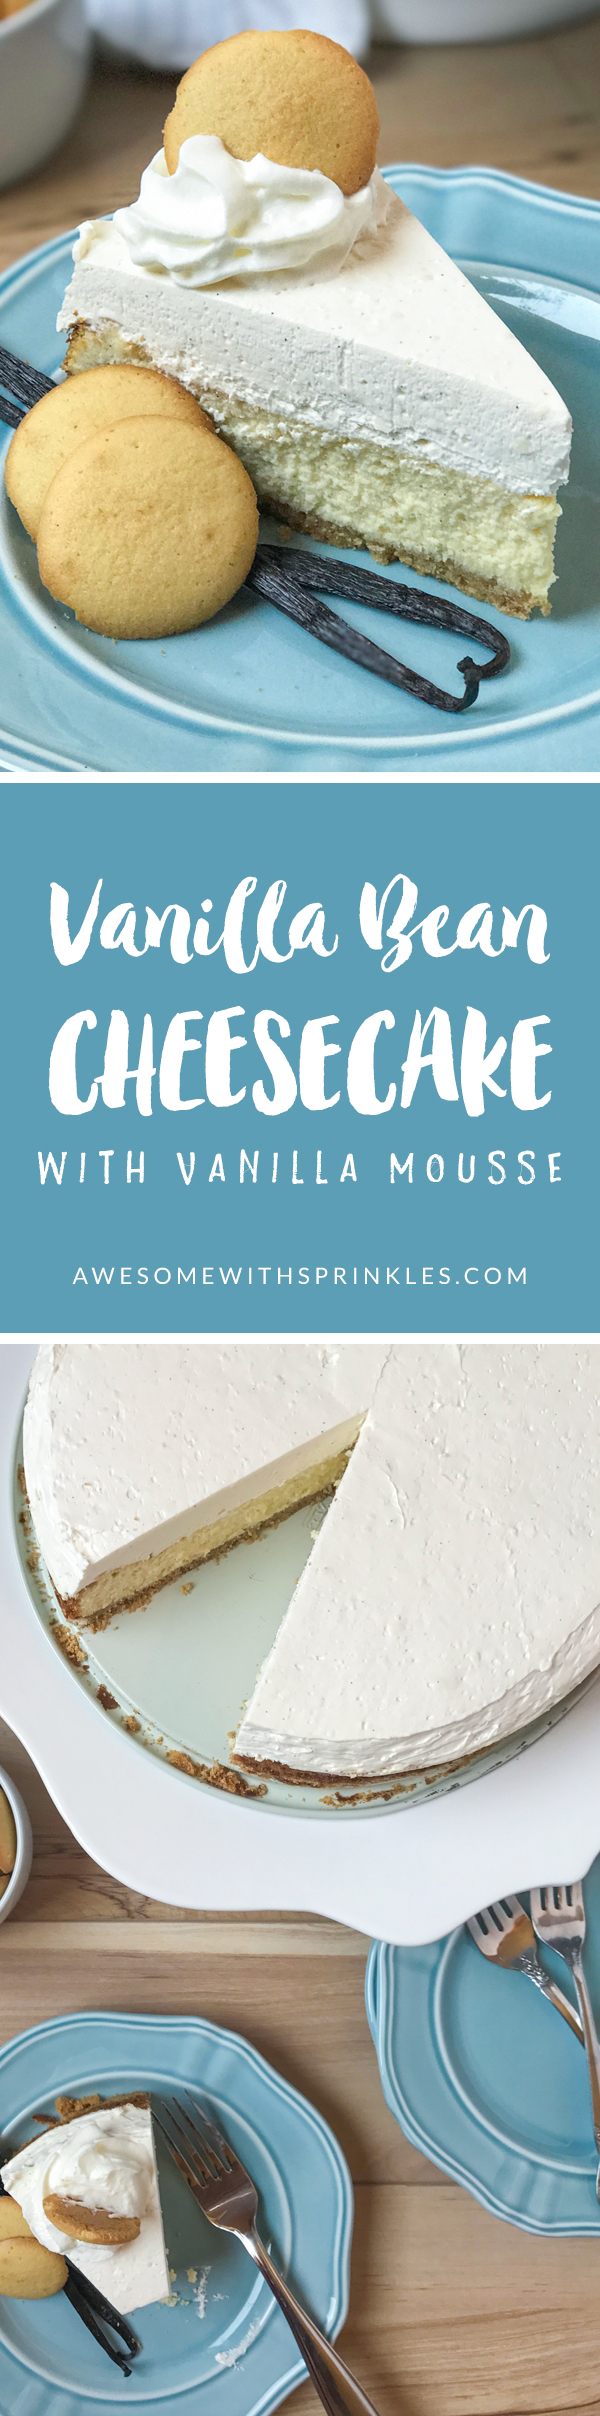 Rich and creamy with a thick layer of smooth vanilla mousse, this vanilla bean cheesecake may be easy, but it is anything but basic. | Awesome with Sprinkles